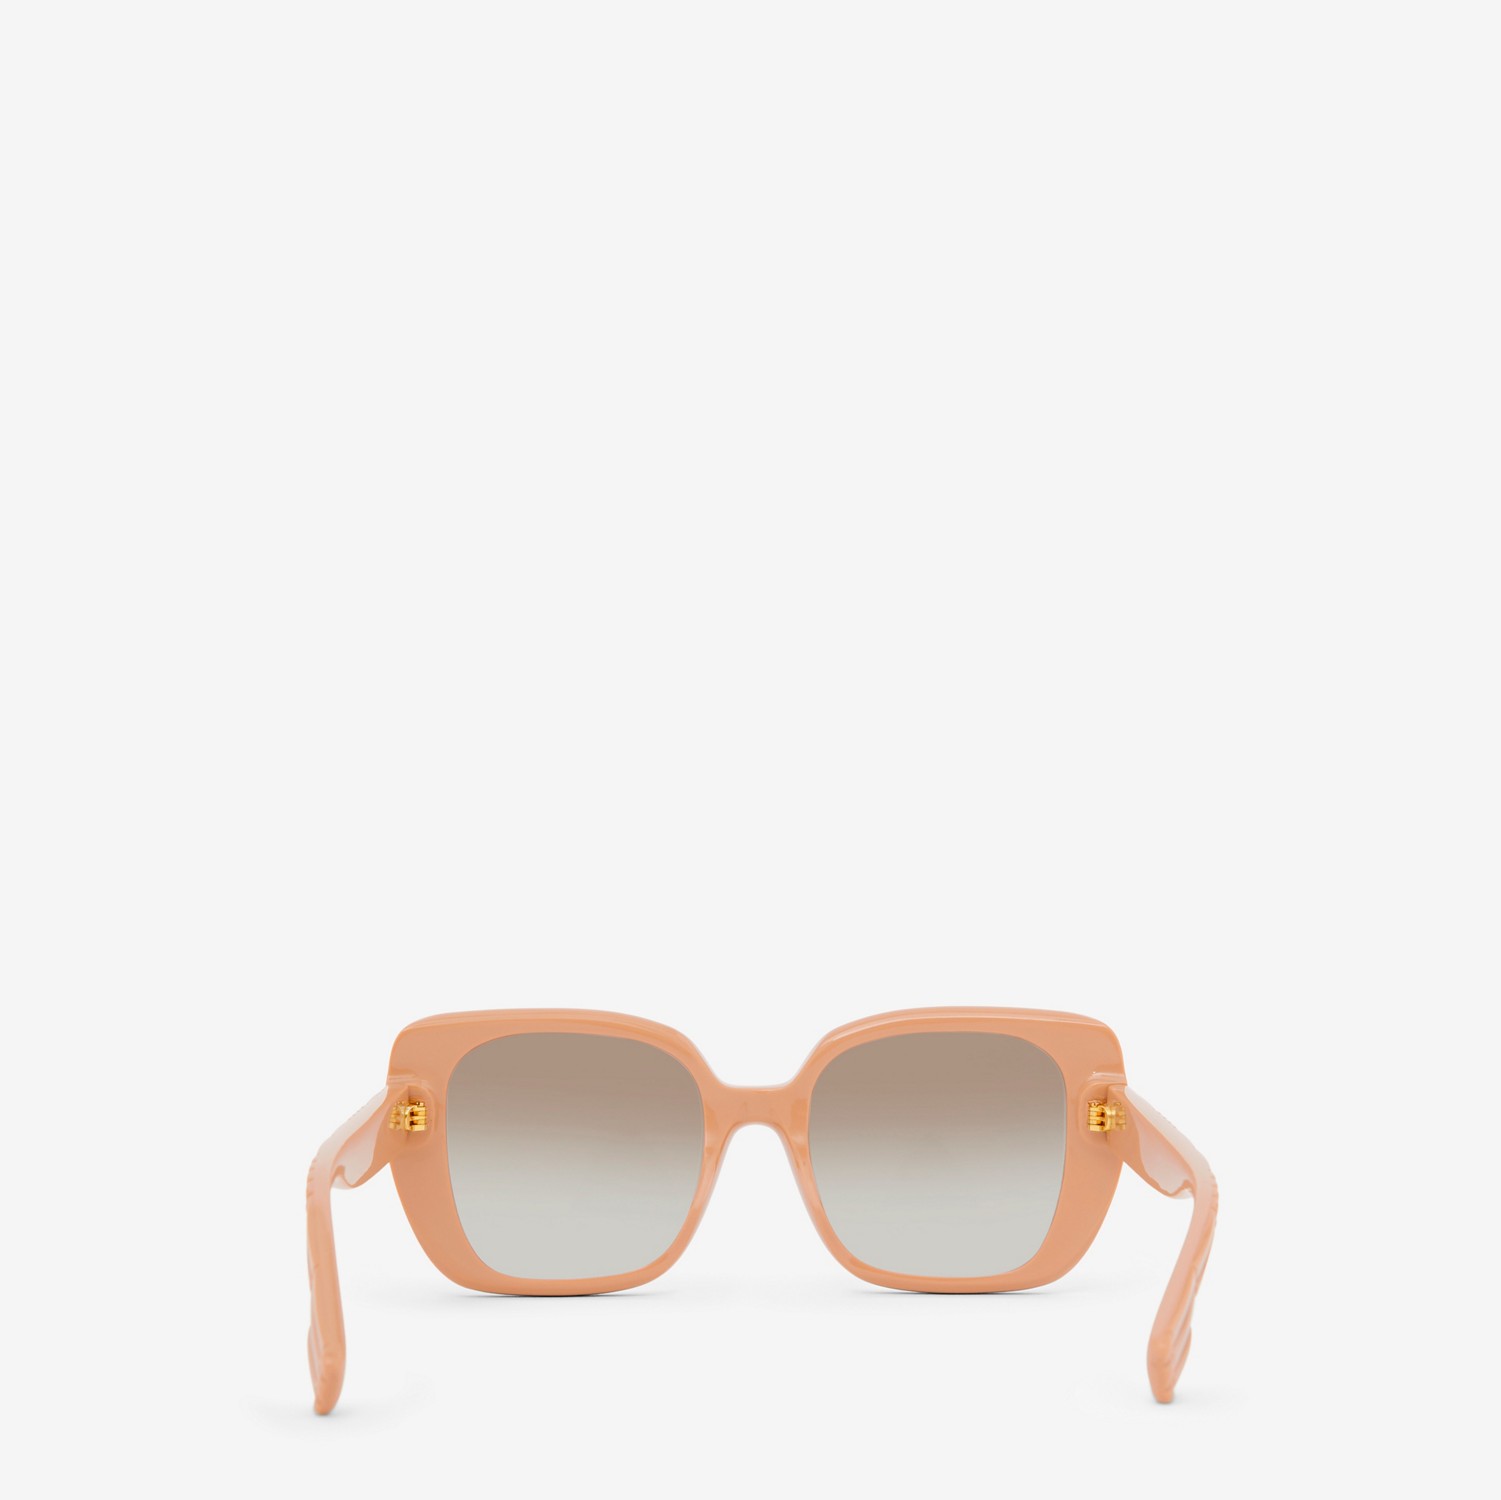 Monogram Motif Oversized Square Frame Lola Sunglasses in Biscuit Beige - Women | Burberry® Official